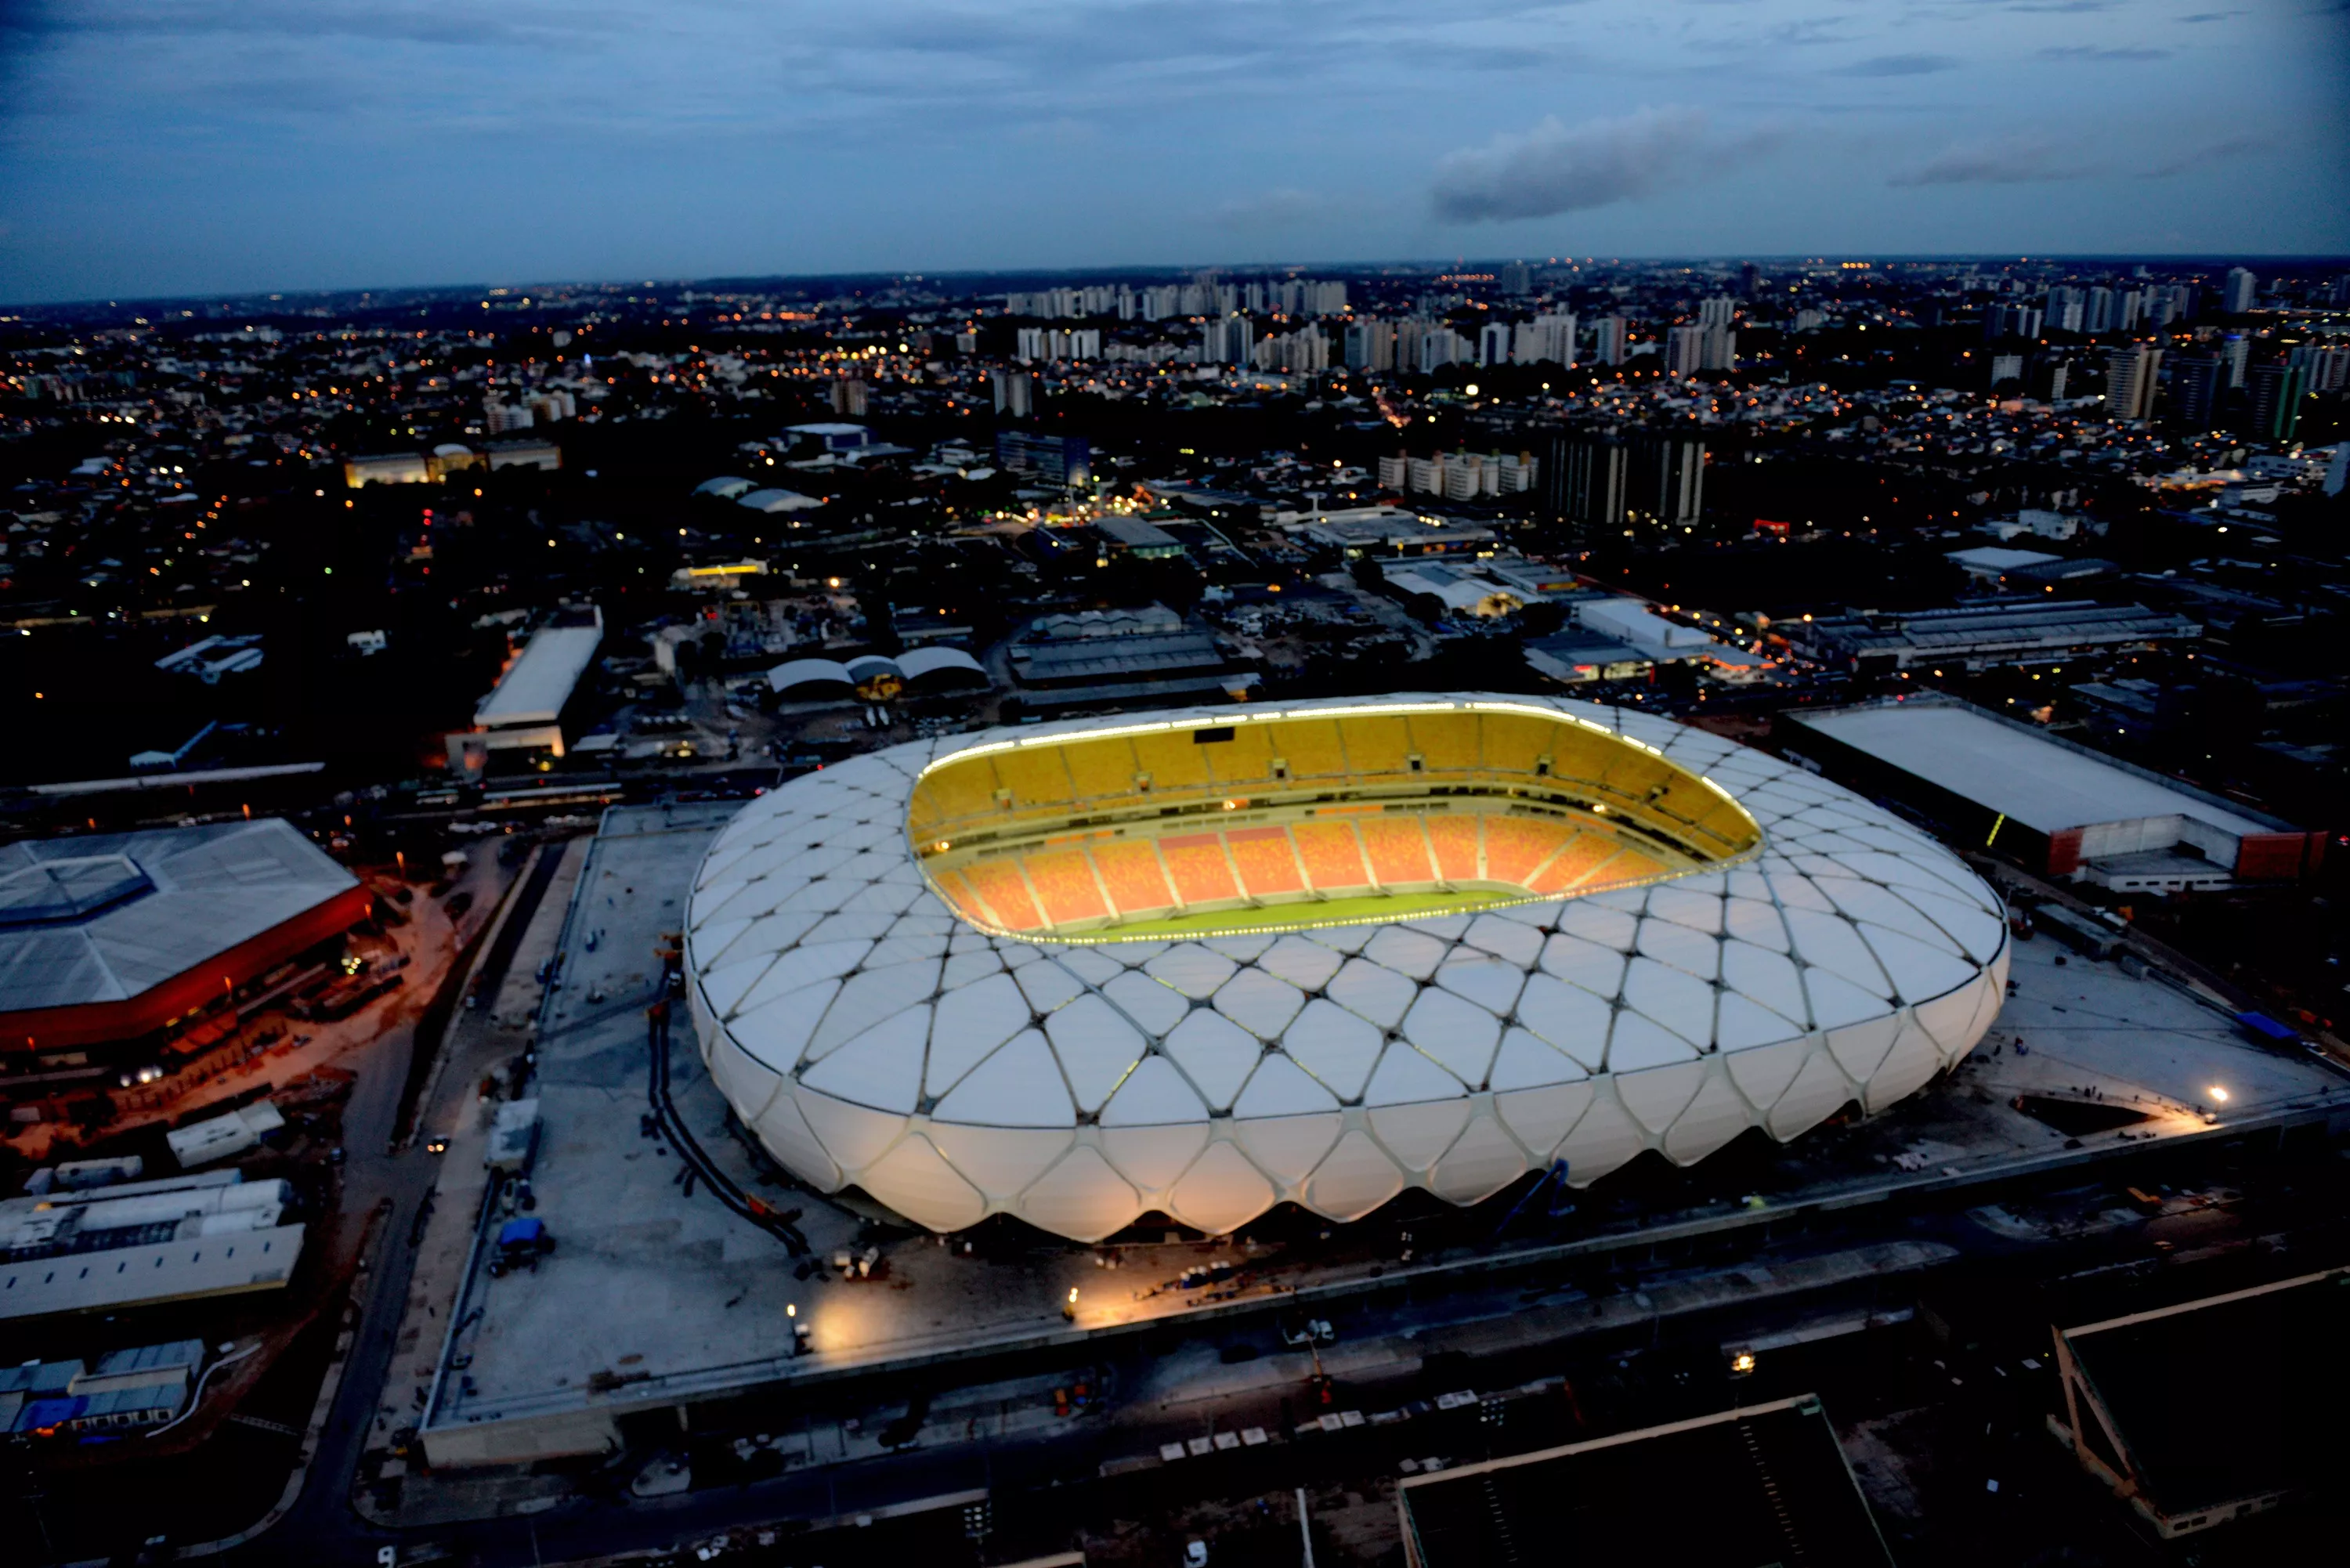 Arena Amazonia in Brazil, South America | Football - Rated 4.5